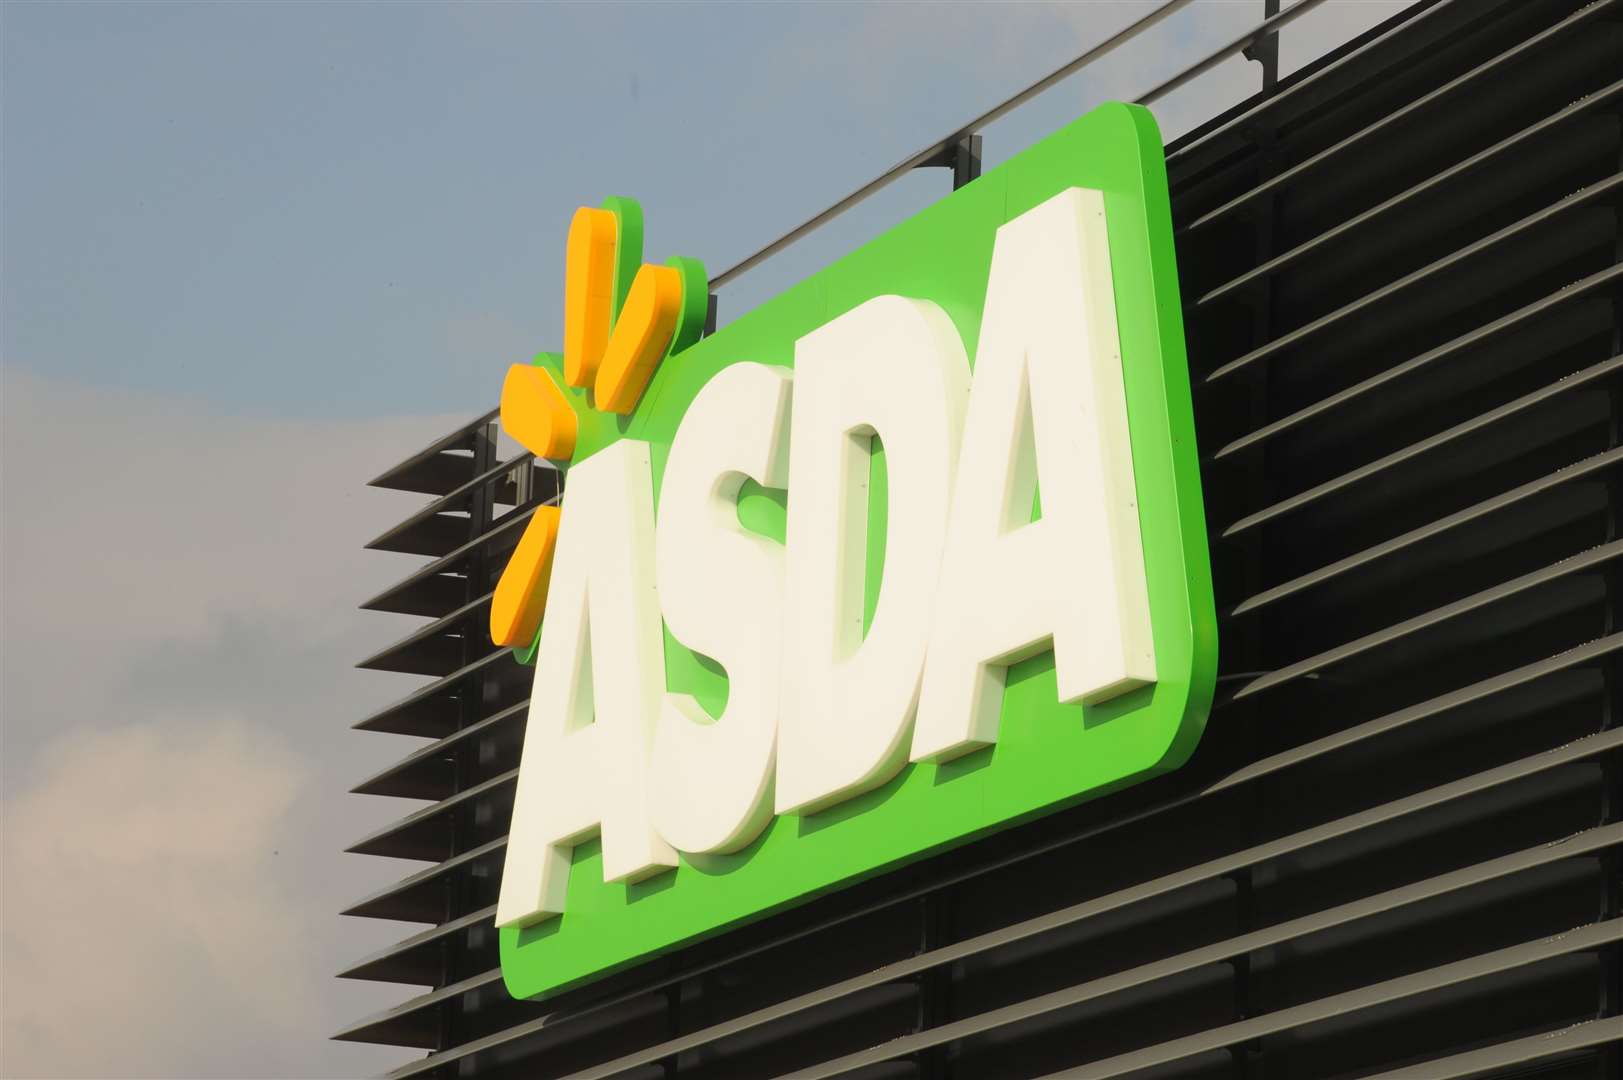 Both Asda and Tesco objected to the plans